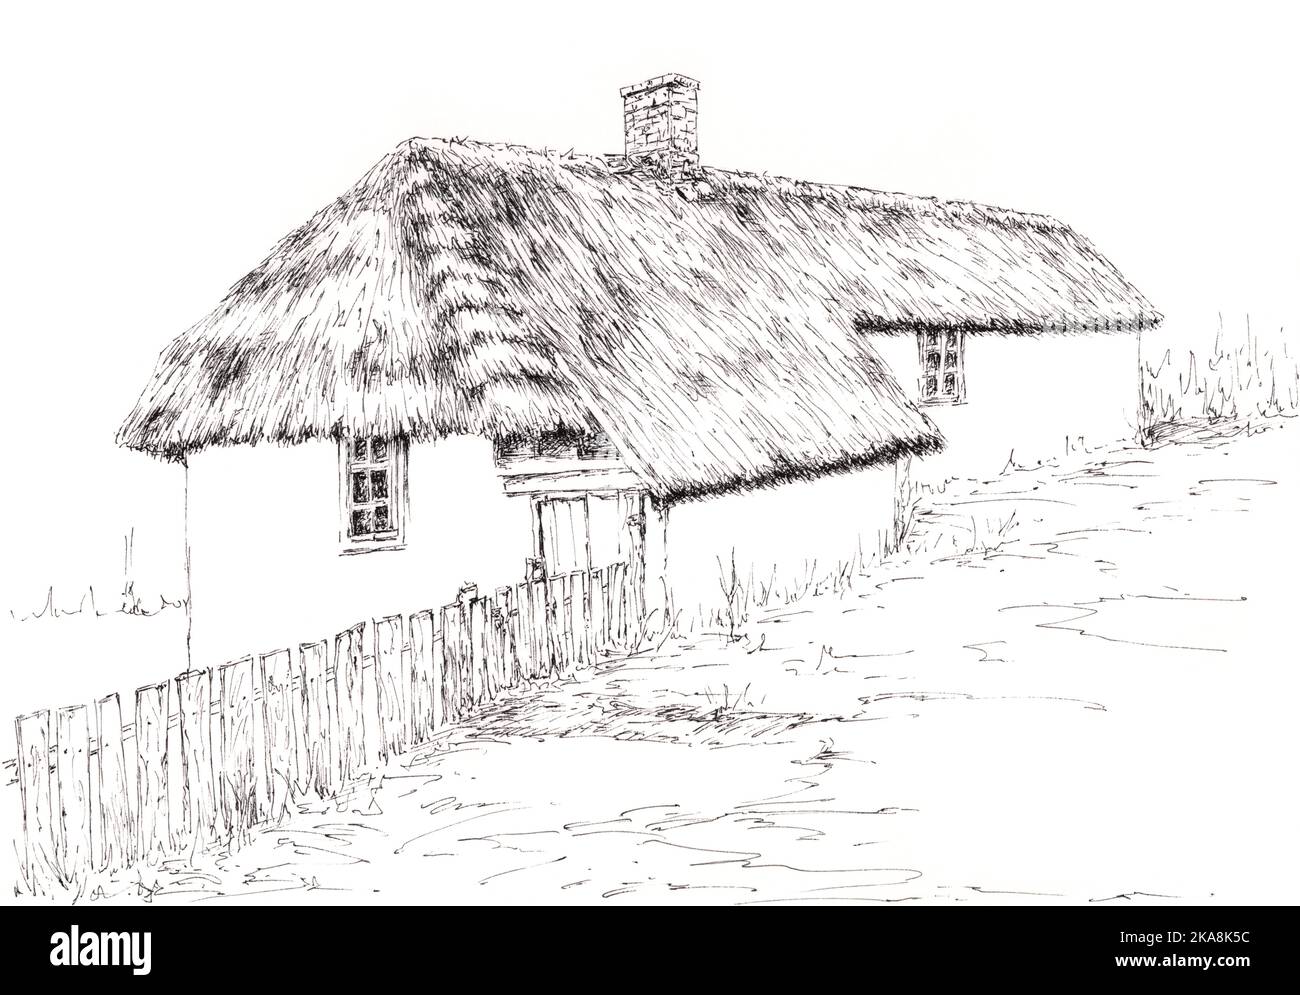 Ancient house with thatched roof. Ink on paper. Stock Photo